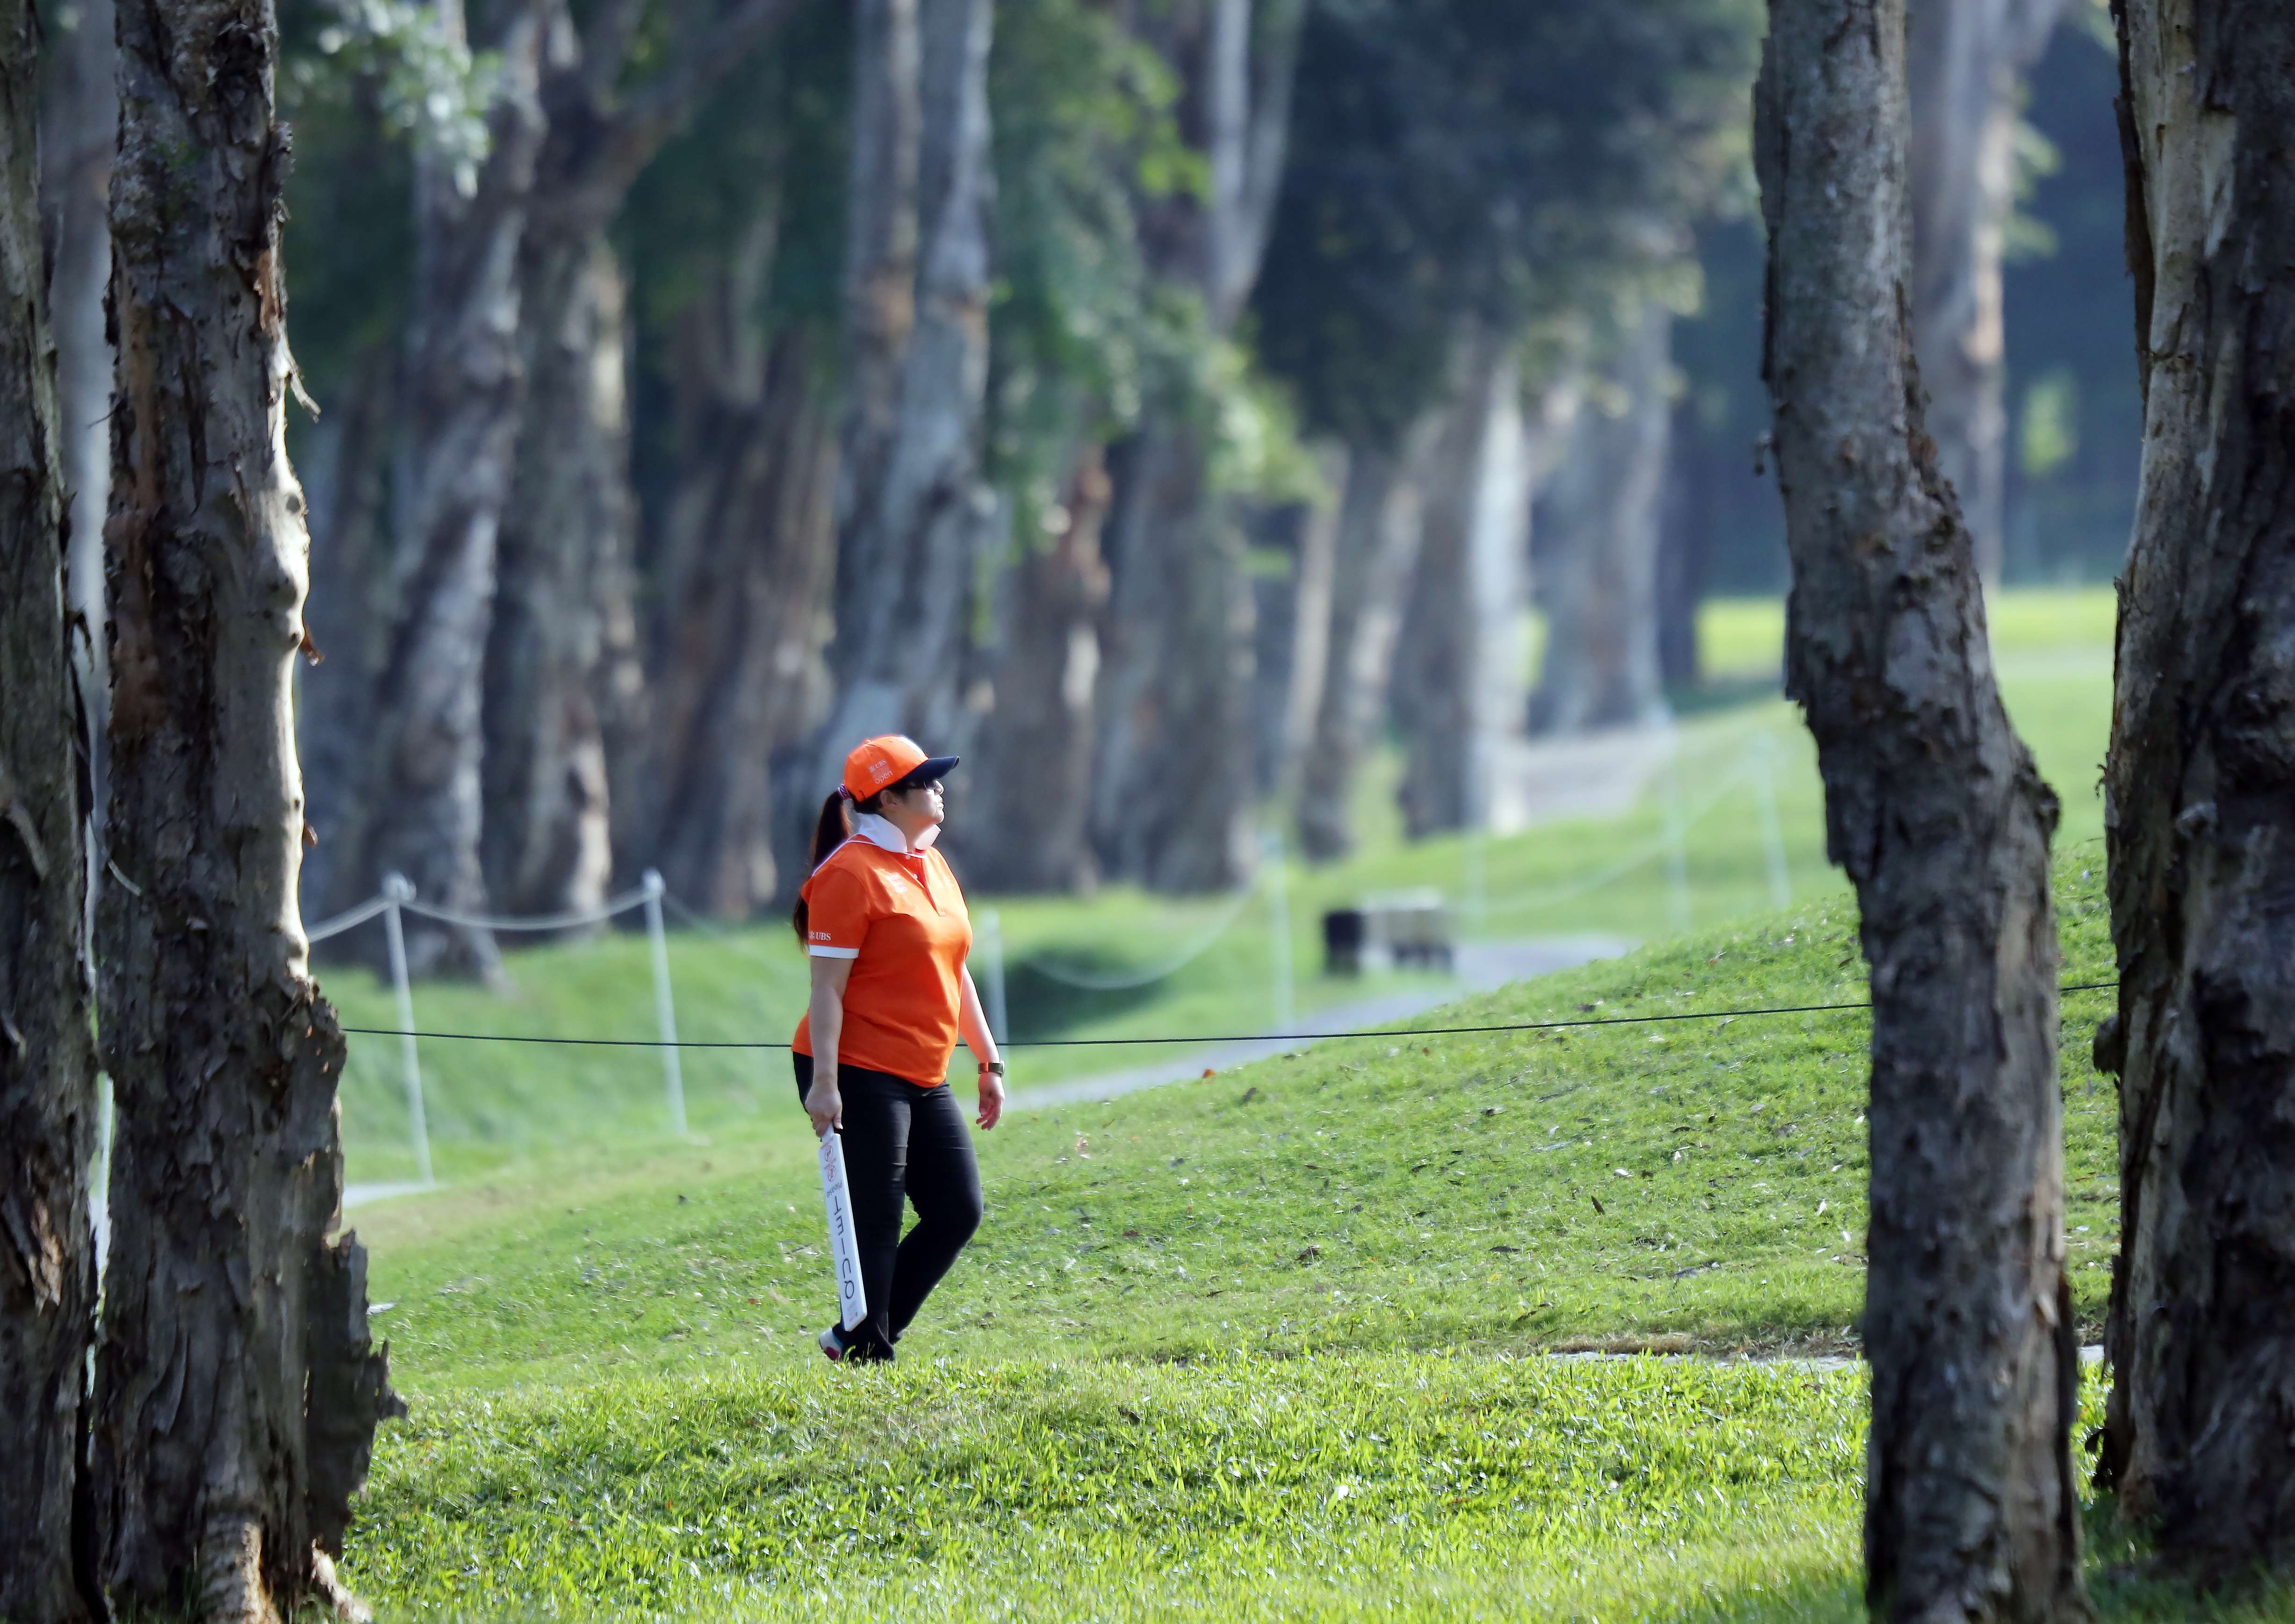 A staff member walks around the Fanling course during the Hong Kong Open golf tournament in 2015. Photo: Edward Wong